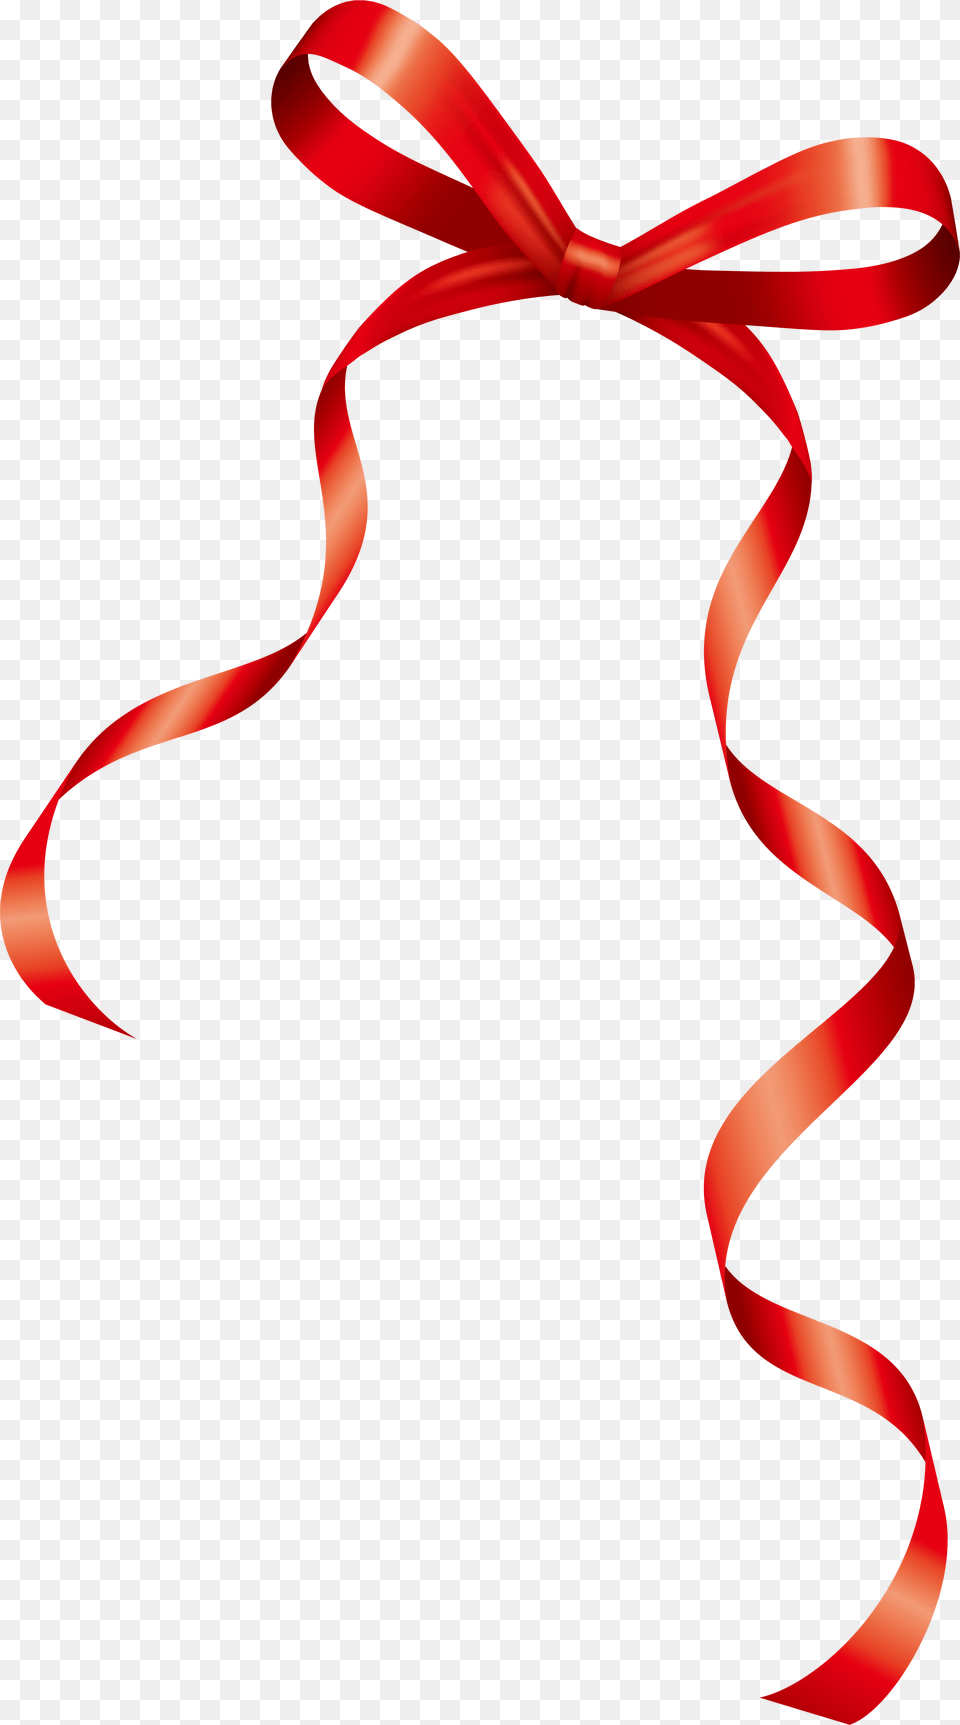 Transparent Hand Drawn Red Arrow Red Ribbon, Accessories, Formal Wear, Tie, Dynamite Png Image